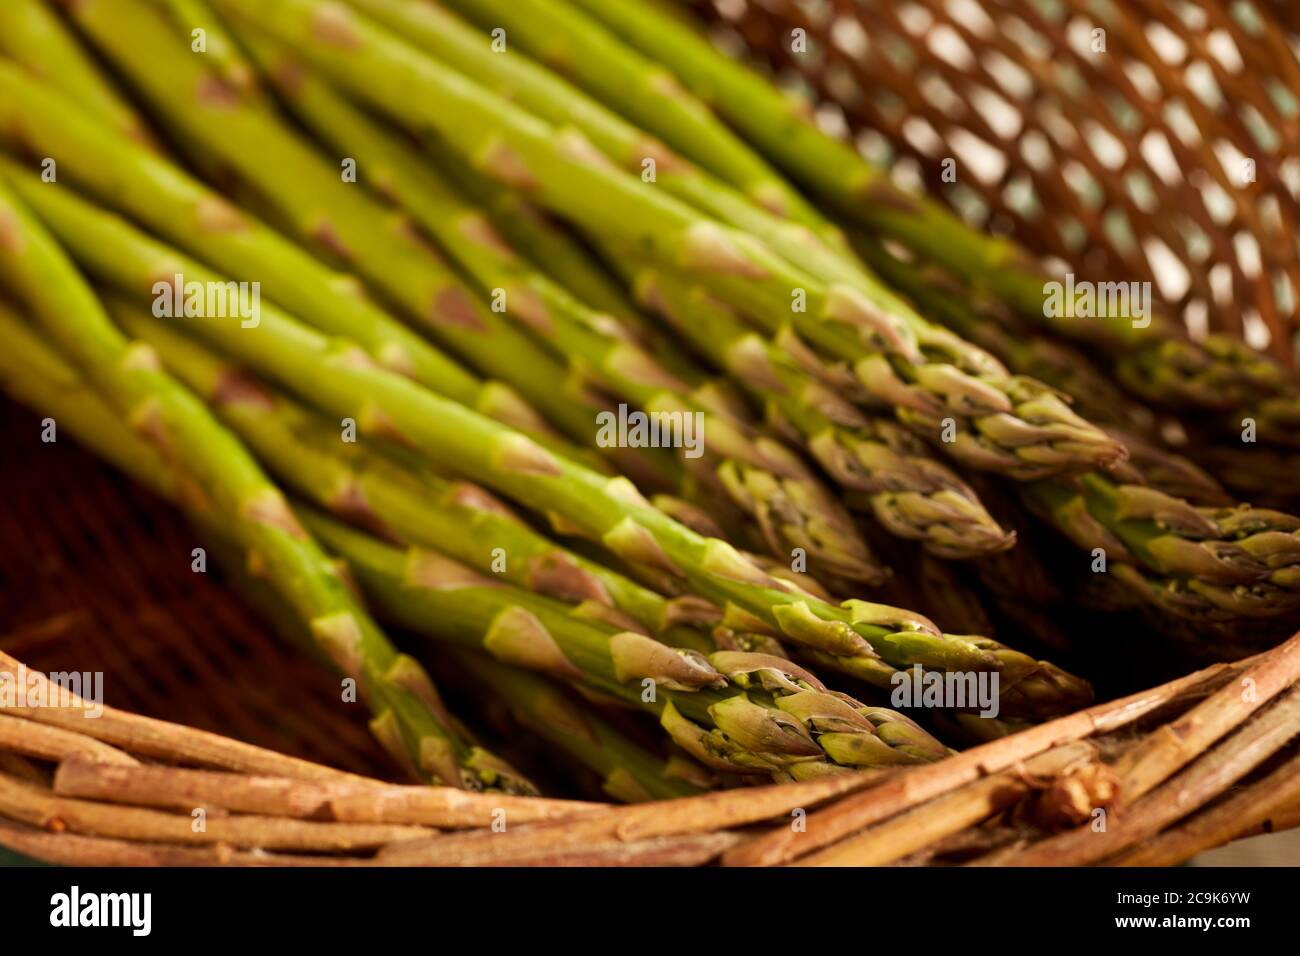 A basket of fresh, raw asparagus spears from Lancaster, Pennsylvania, USA Stock Photo